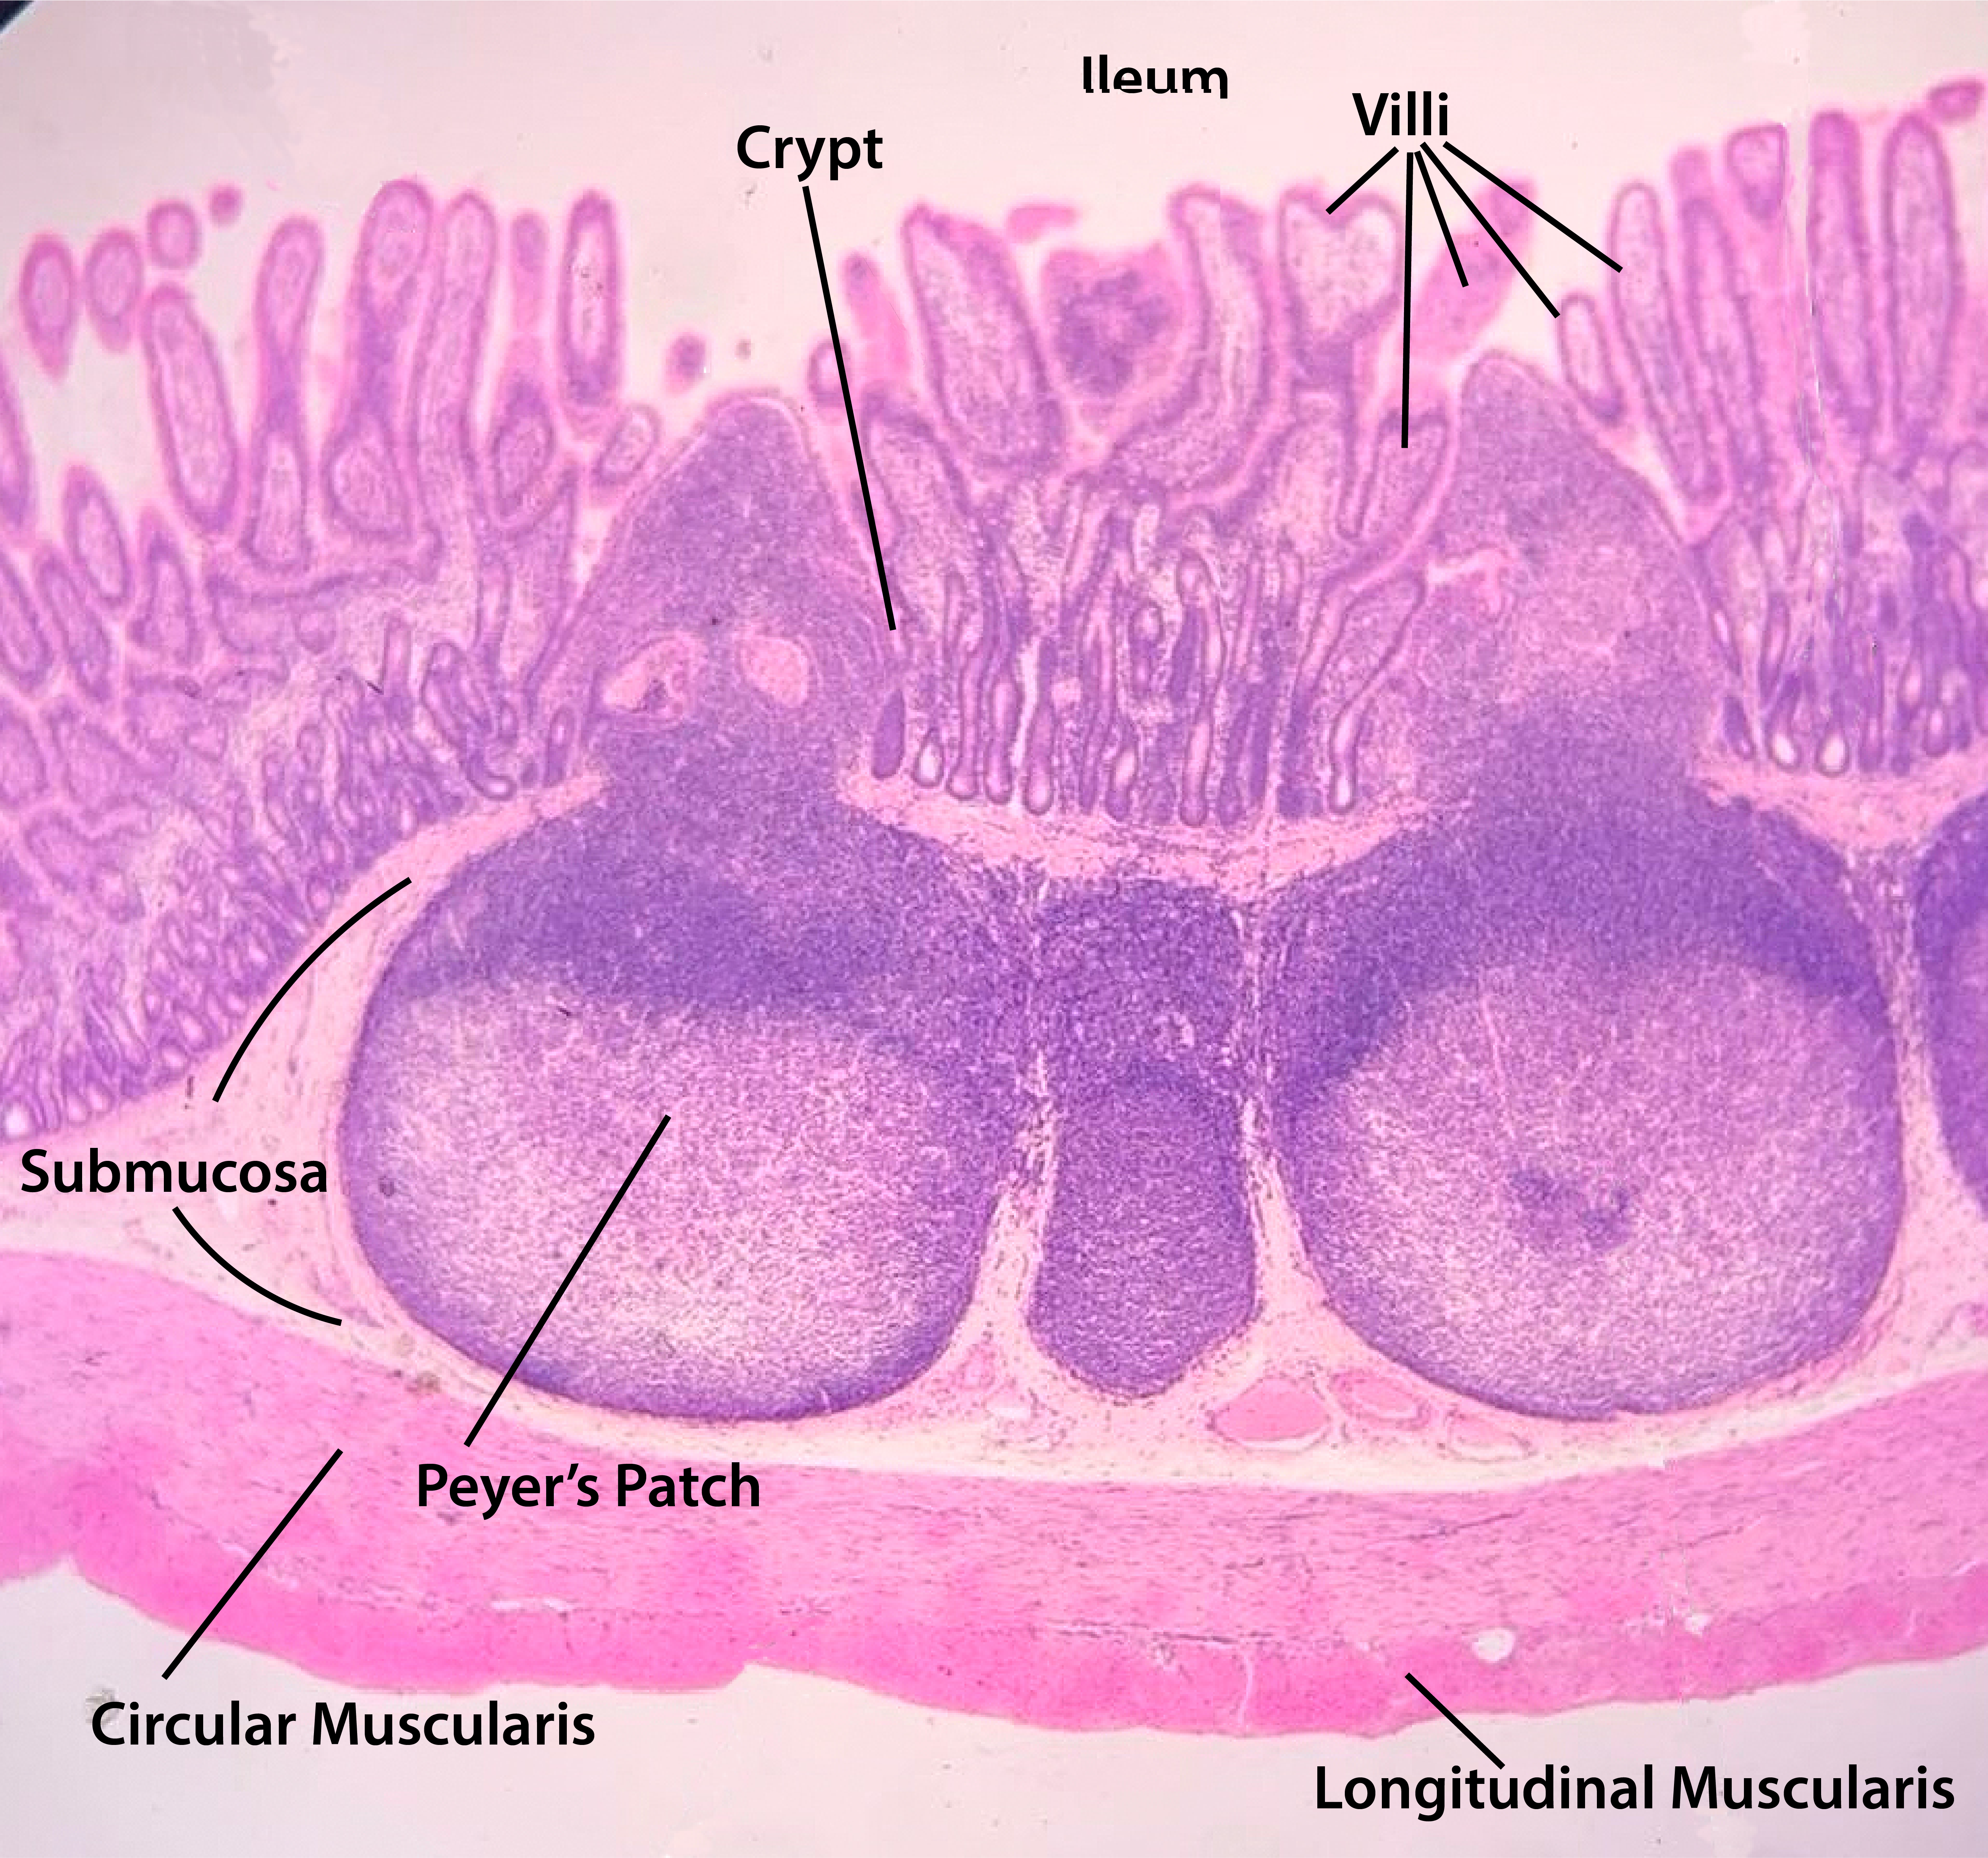 Peyer's Patch and Ileum histology